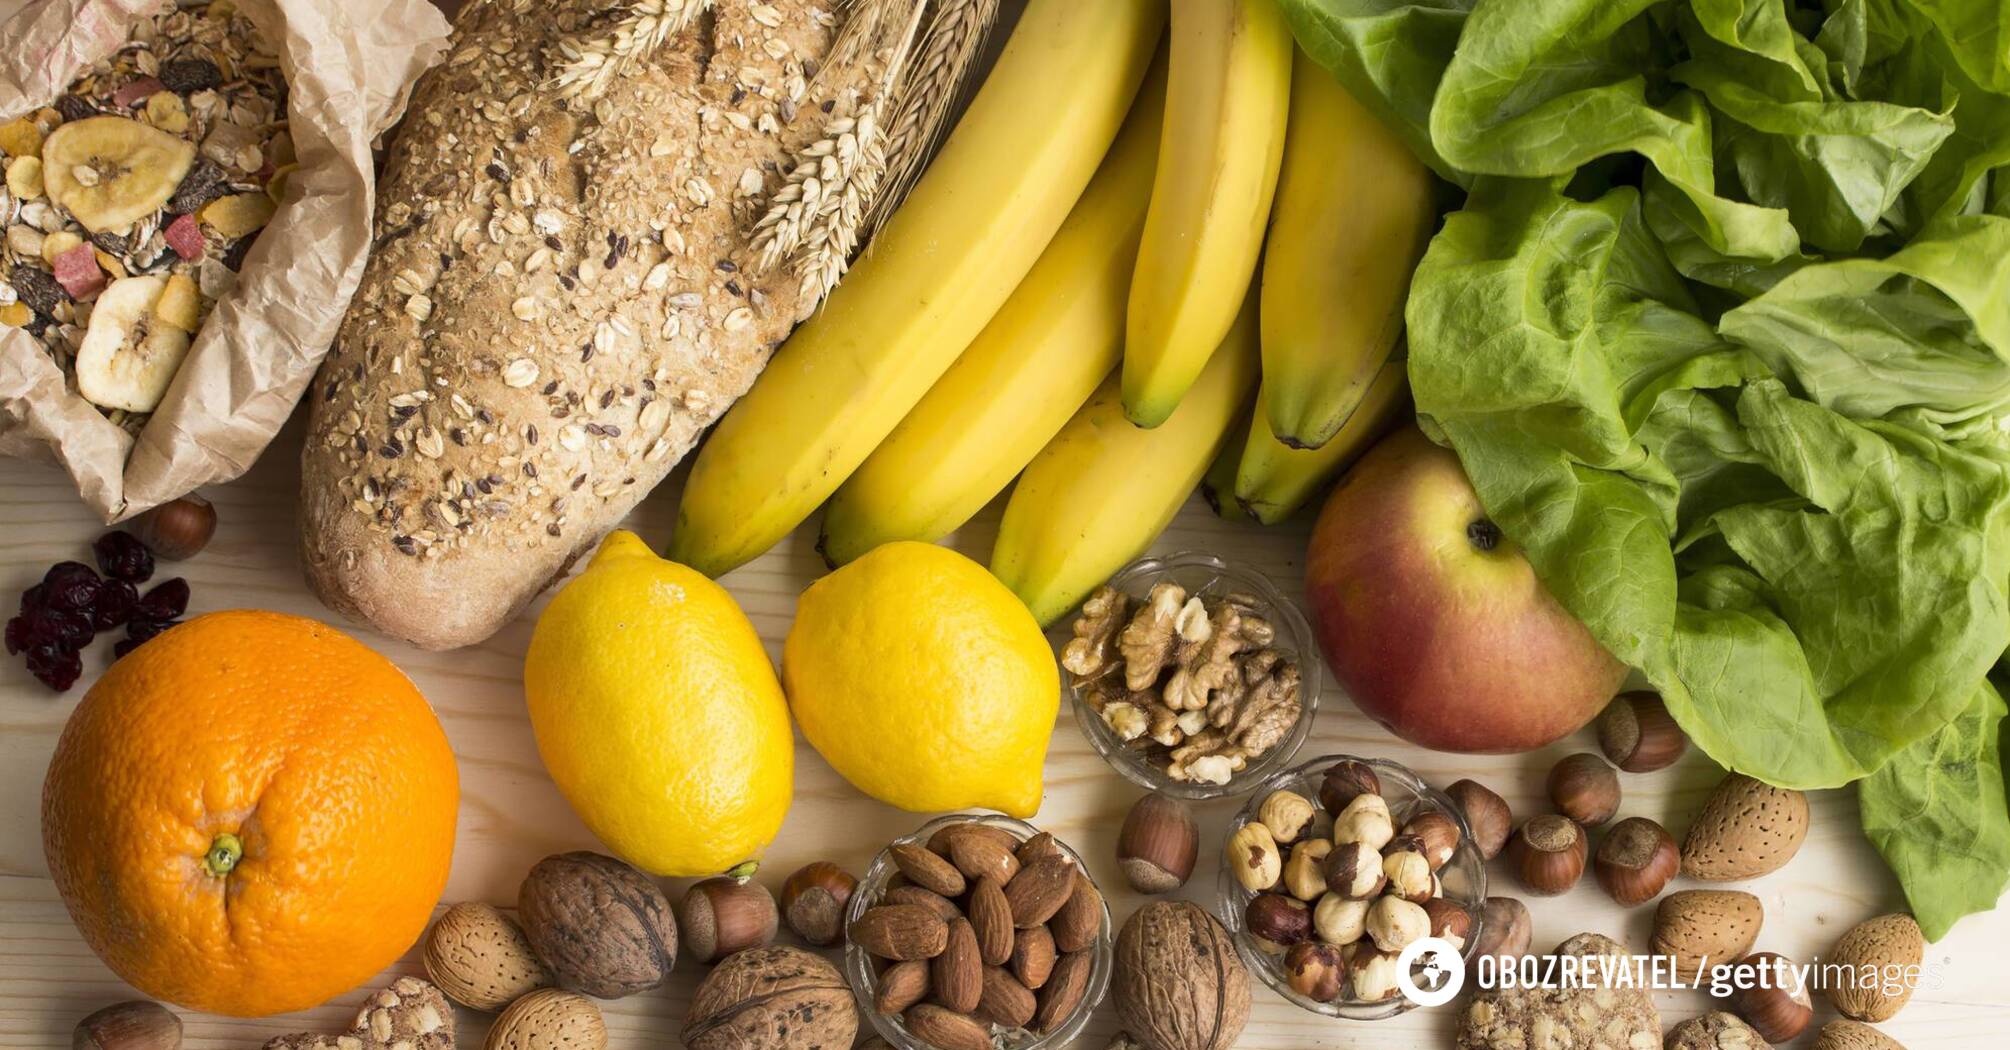 Foods that contain fiber improve the digestive process